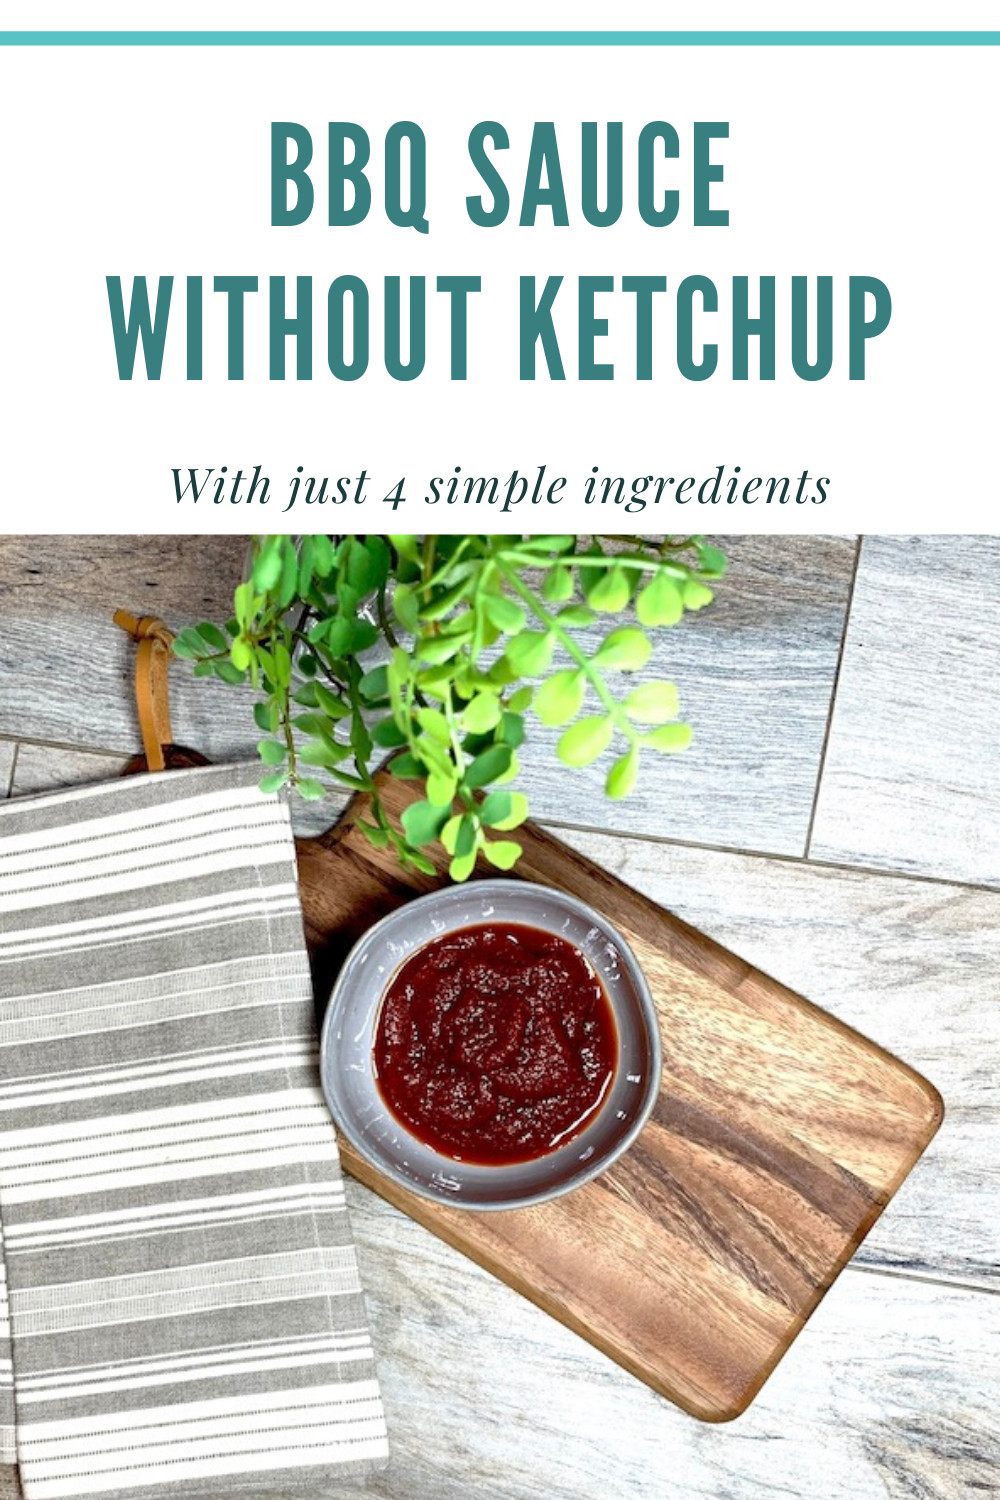 Bbq Sauce Without Ketchup
 Homemade BBQ Sauce Without Ketchup Gluten Free